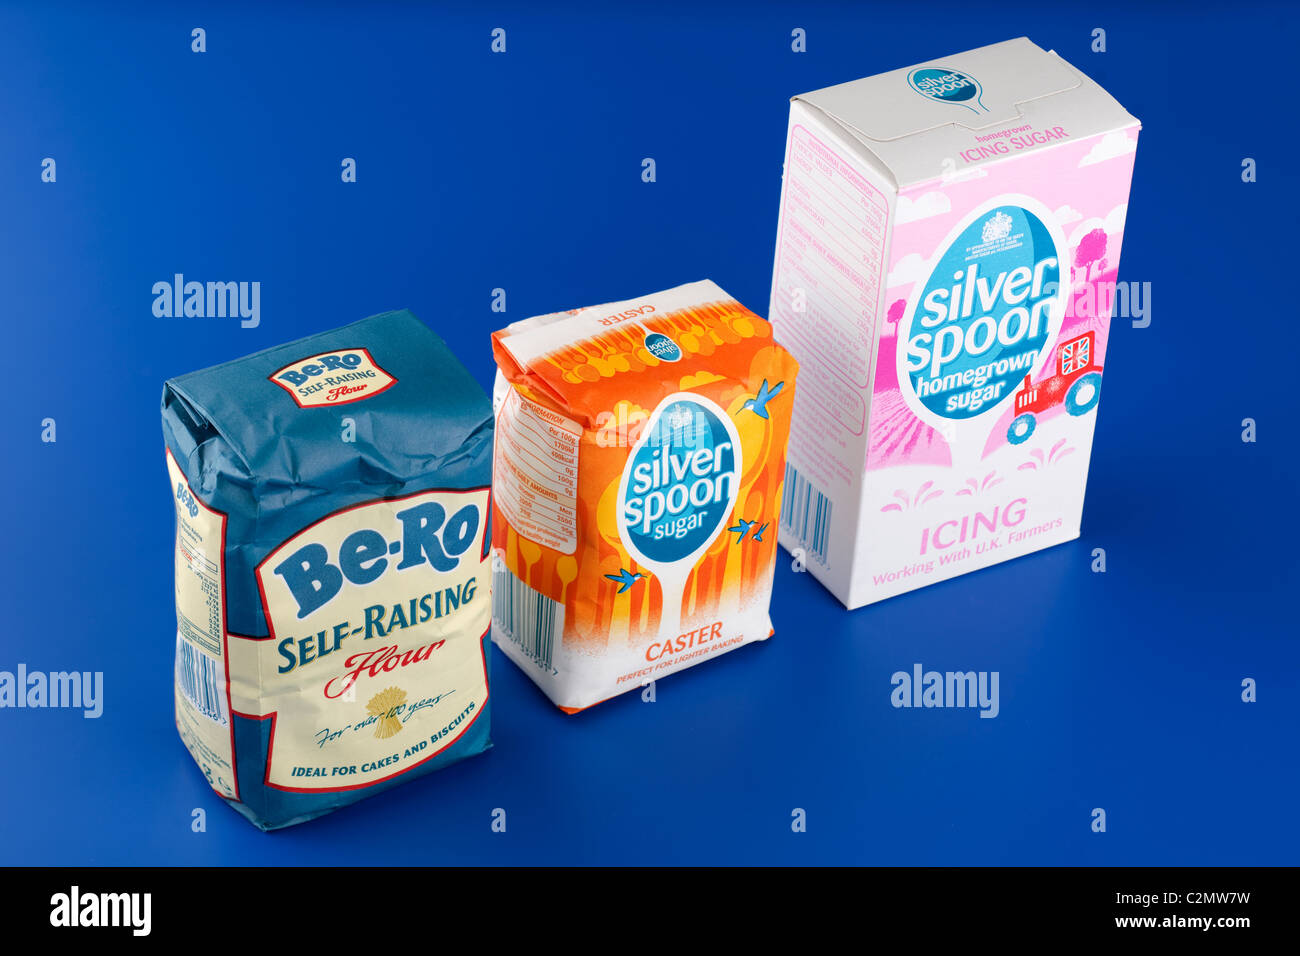 Three bagged and boxed baking products. Stock Photo